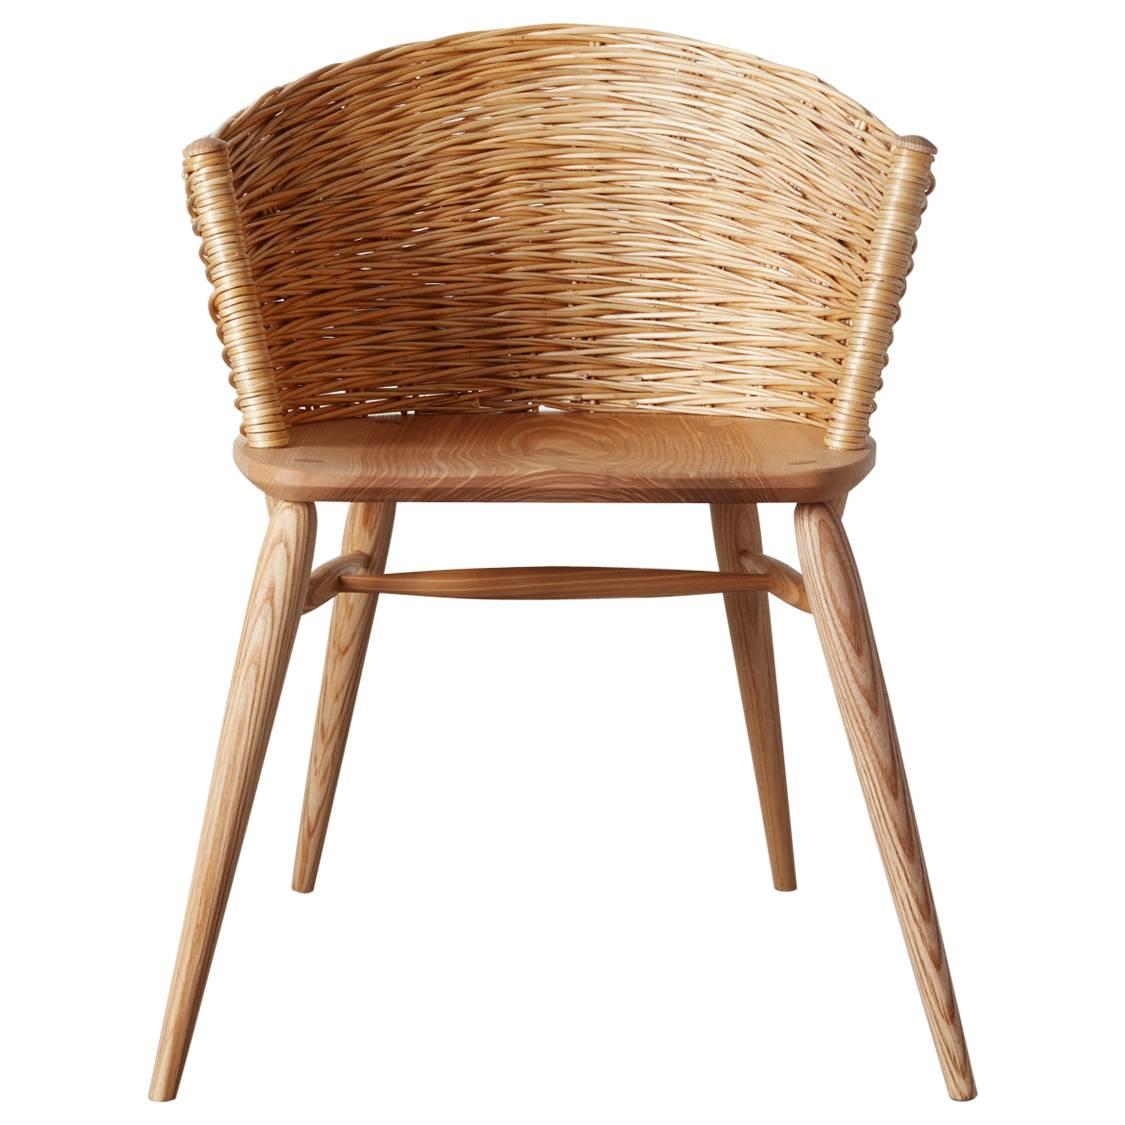 Handwoven Willow Ash Chair by Gareth Neal For Sale